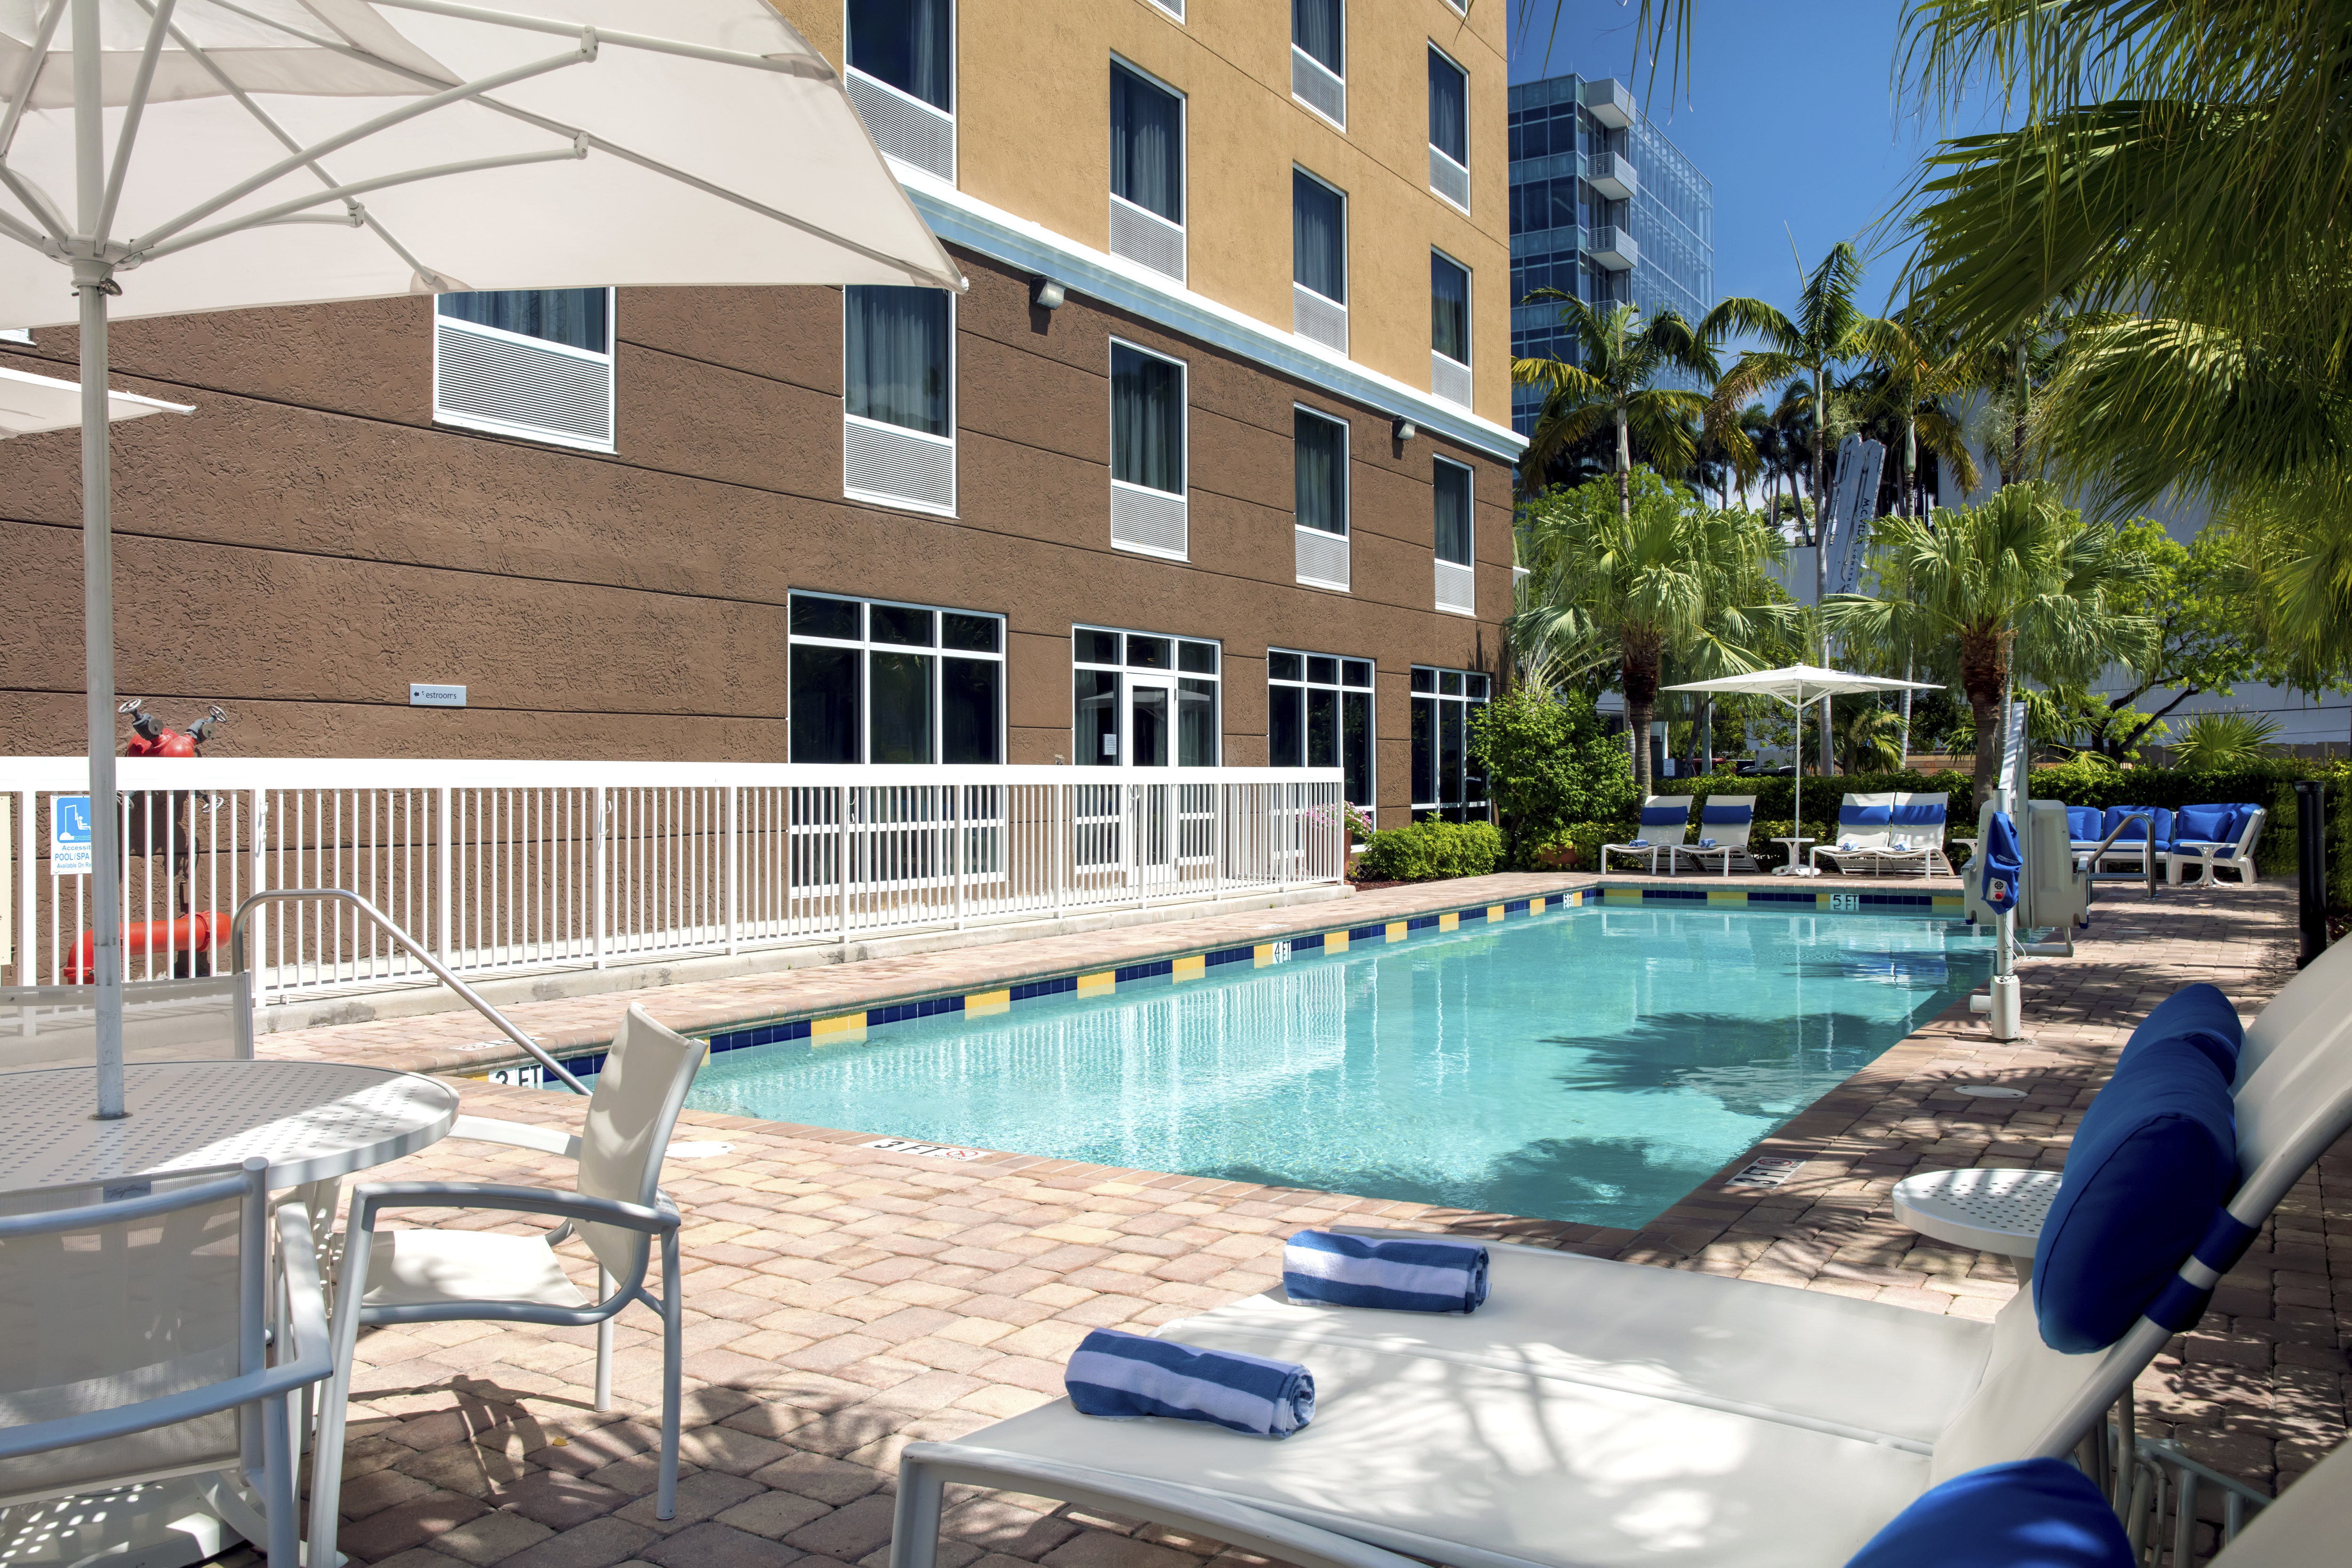 Outdoor Pool Area and Hotel Exterior